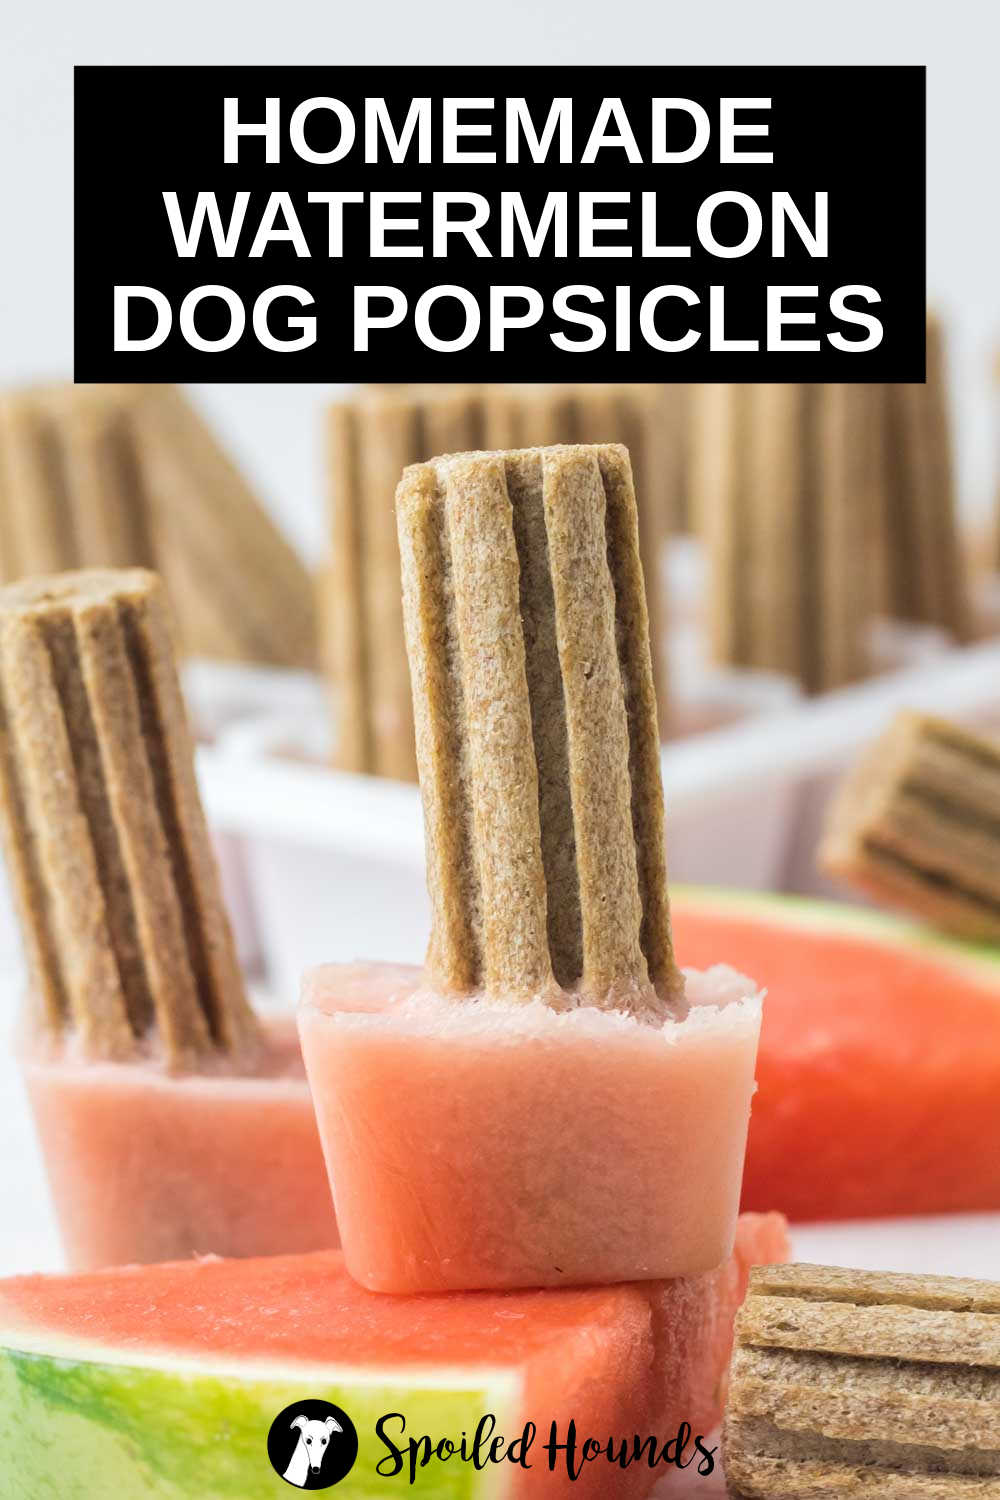 homemade watermelon dog popsicle on top of a watermelon slice.